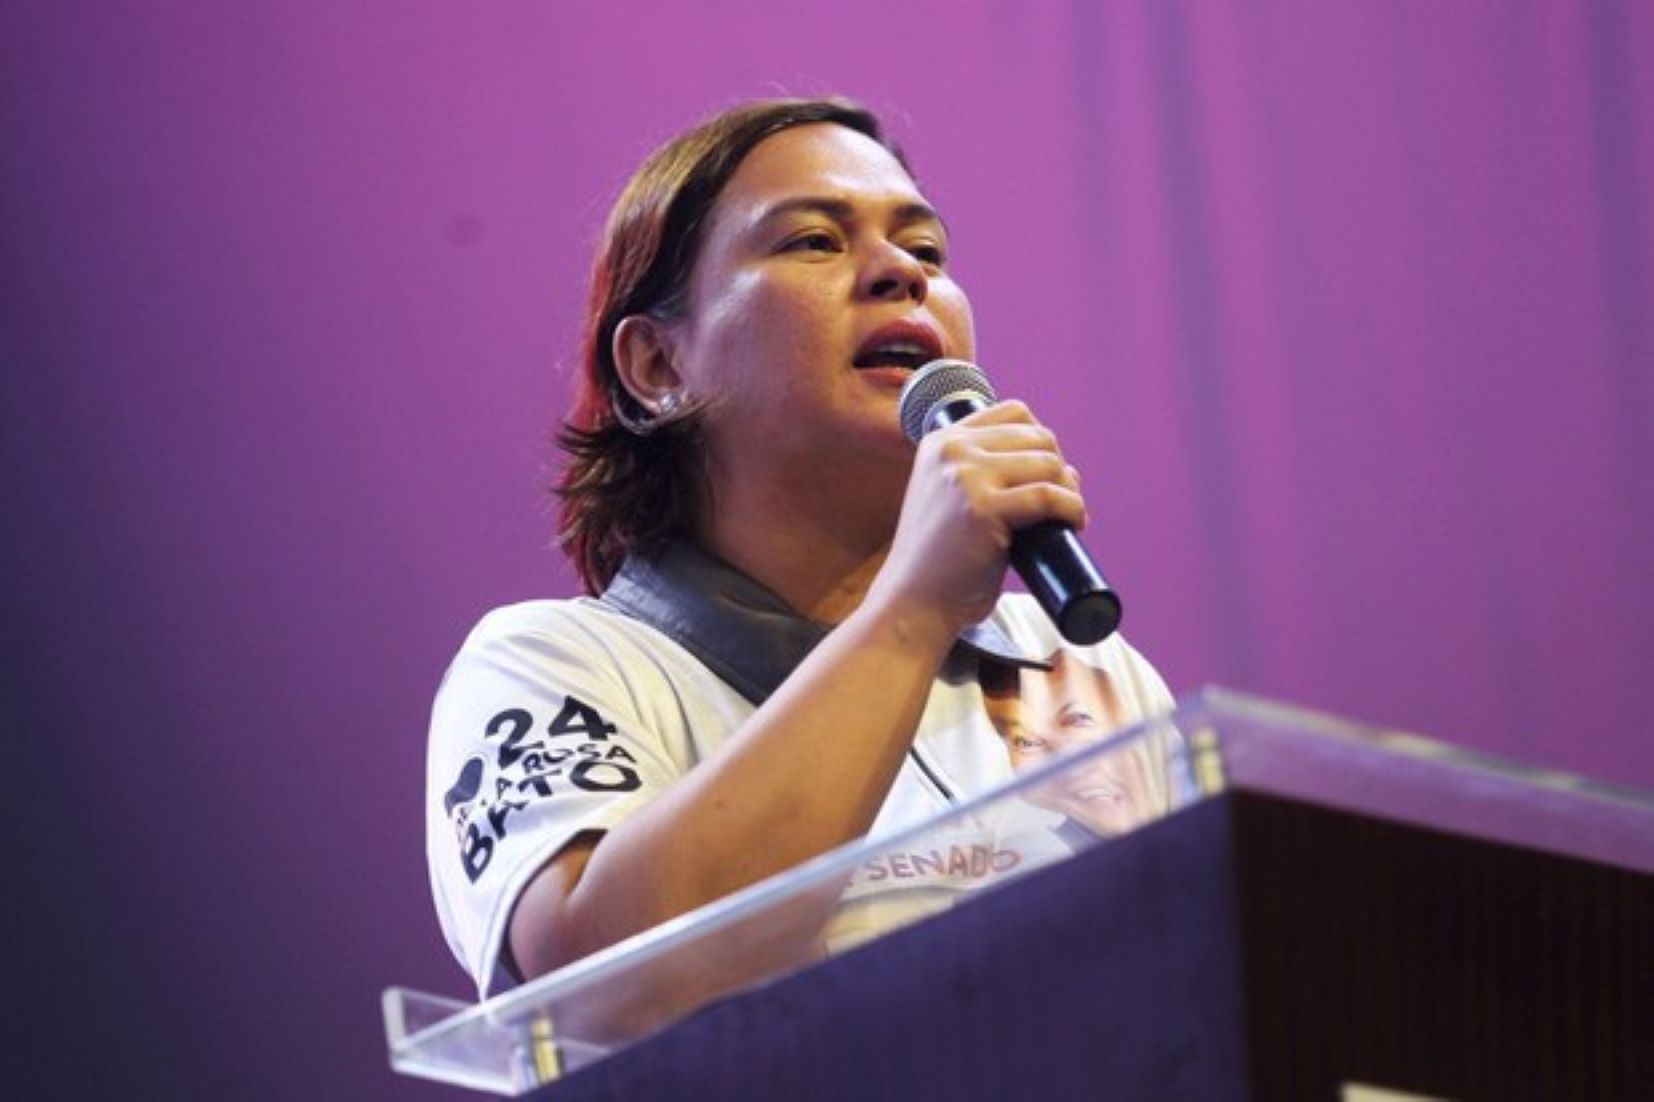 Philippine Vice President Sara Duterte Resigns From Ruling Party